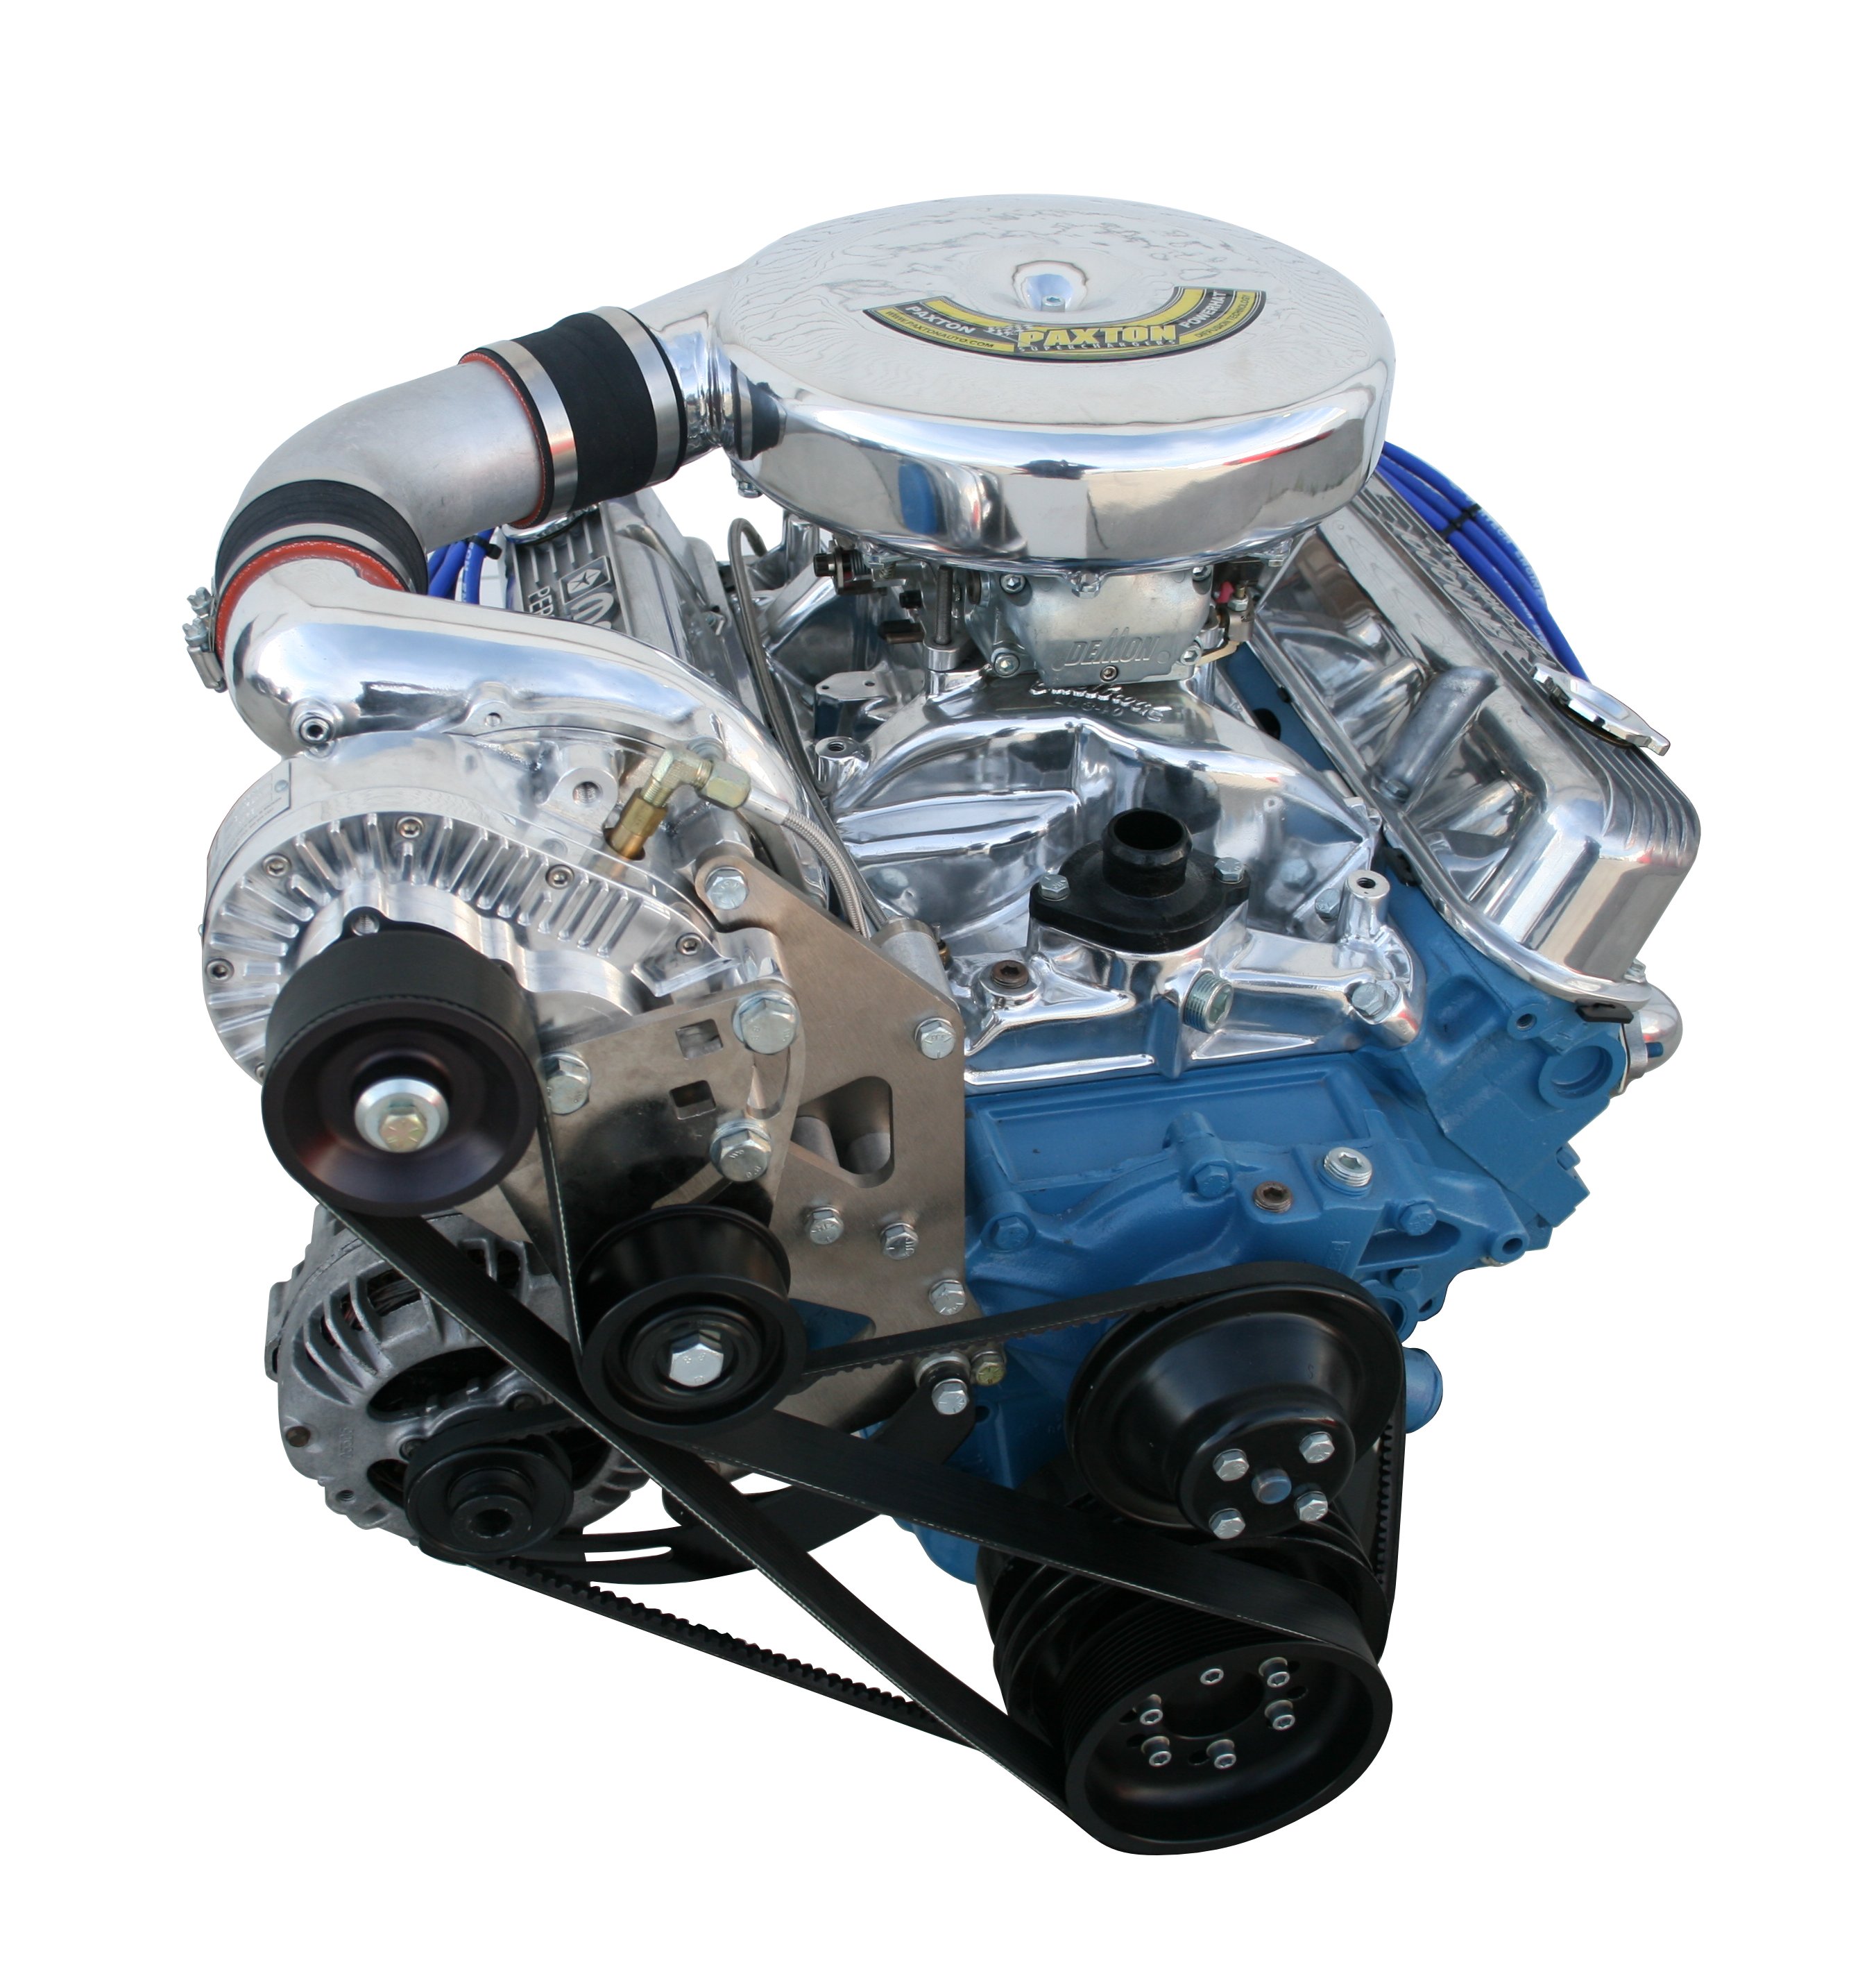 Cars with Supercharged Engines